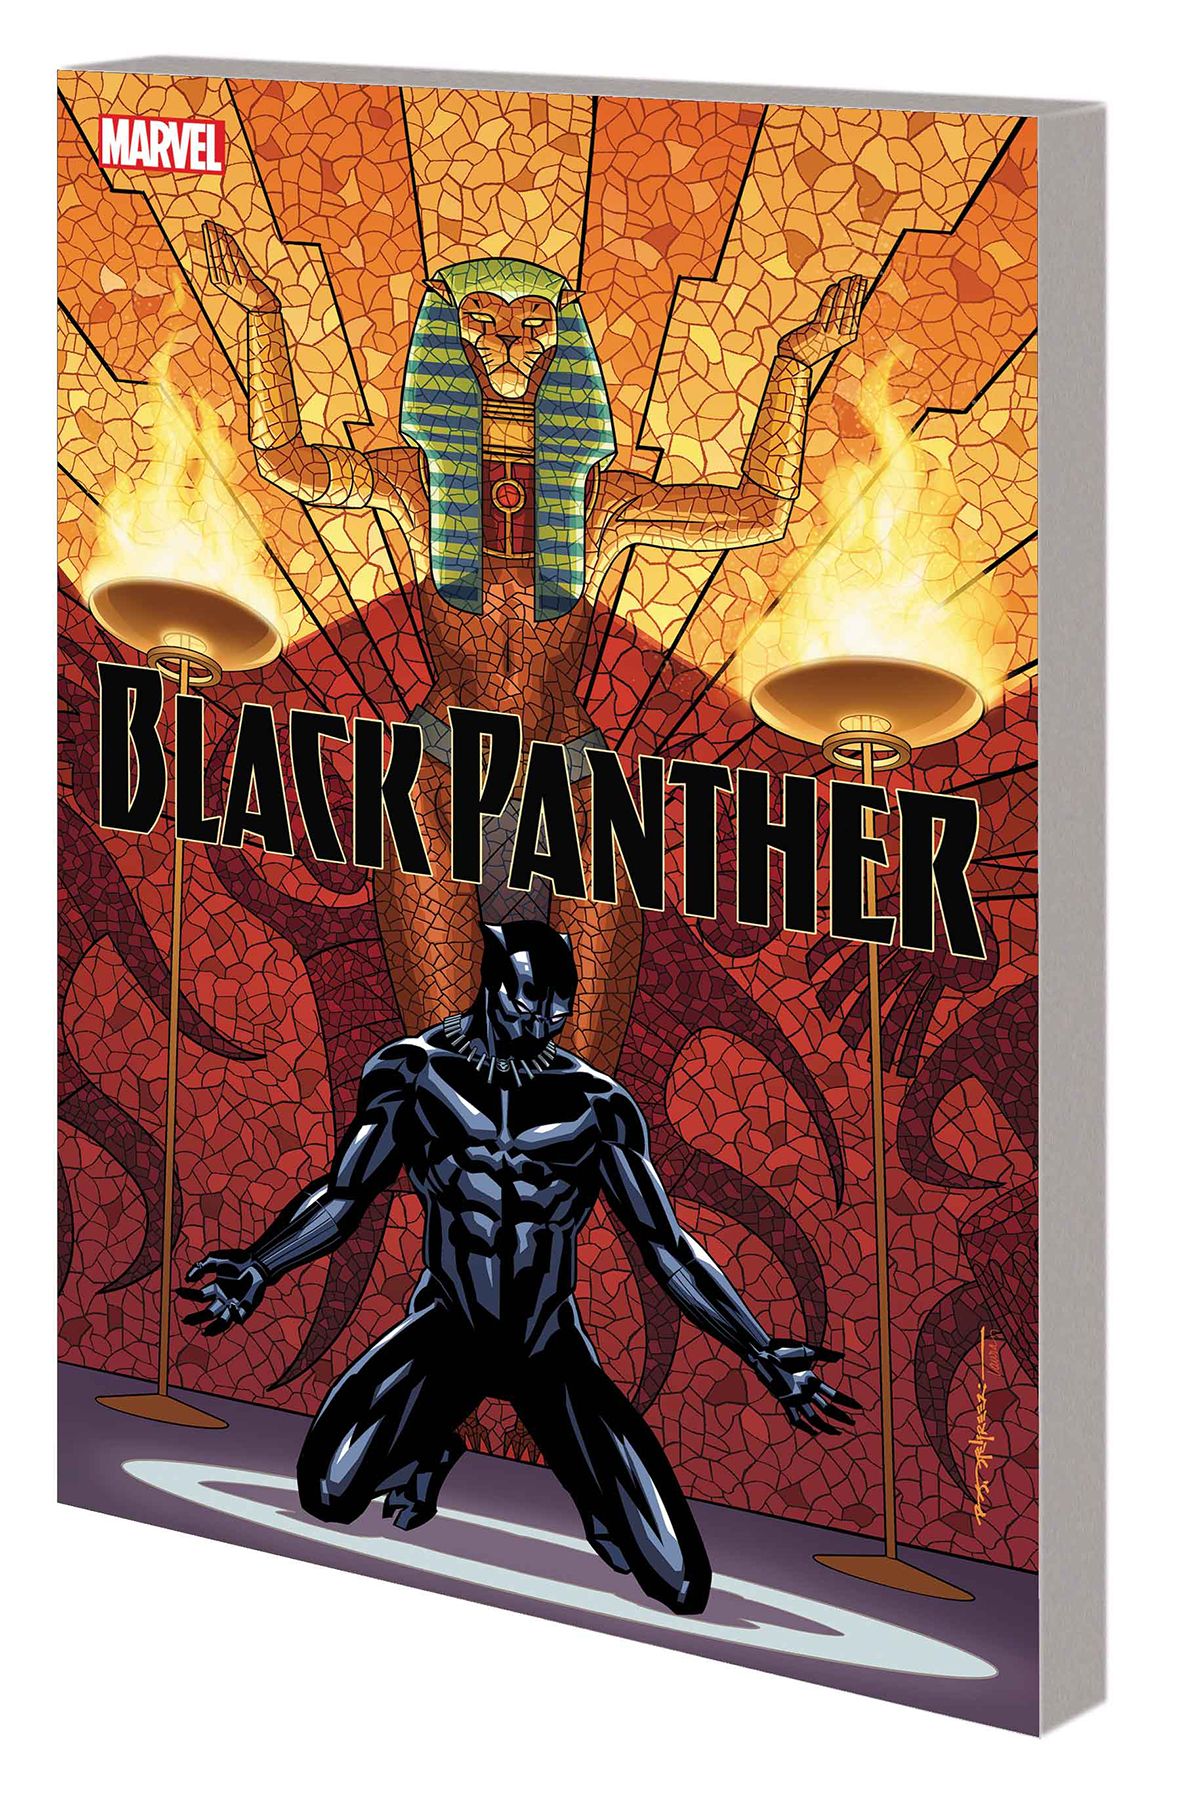 Black Panther Vol. 4 - Avengers of the New World - Part 1